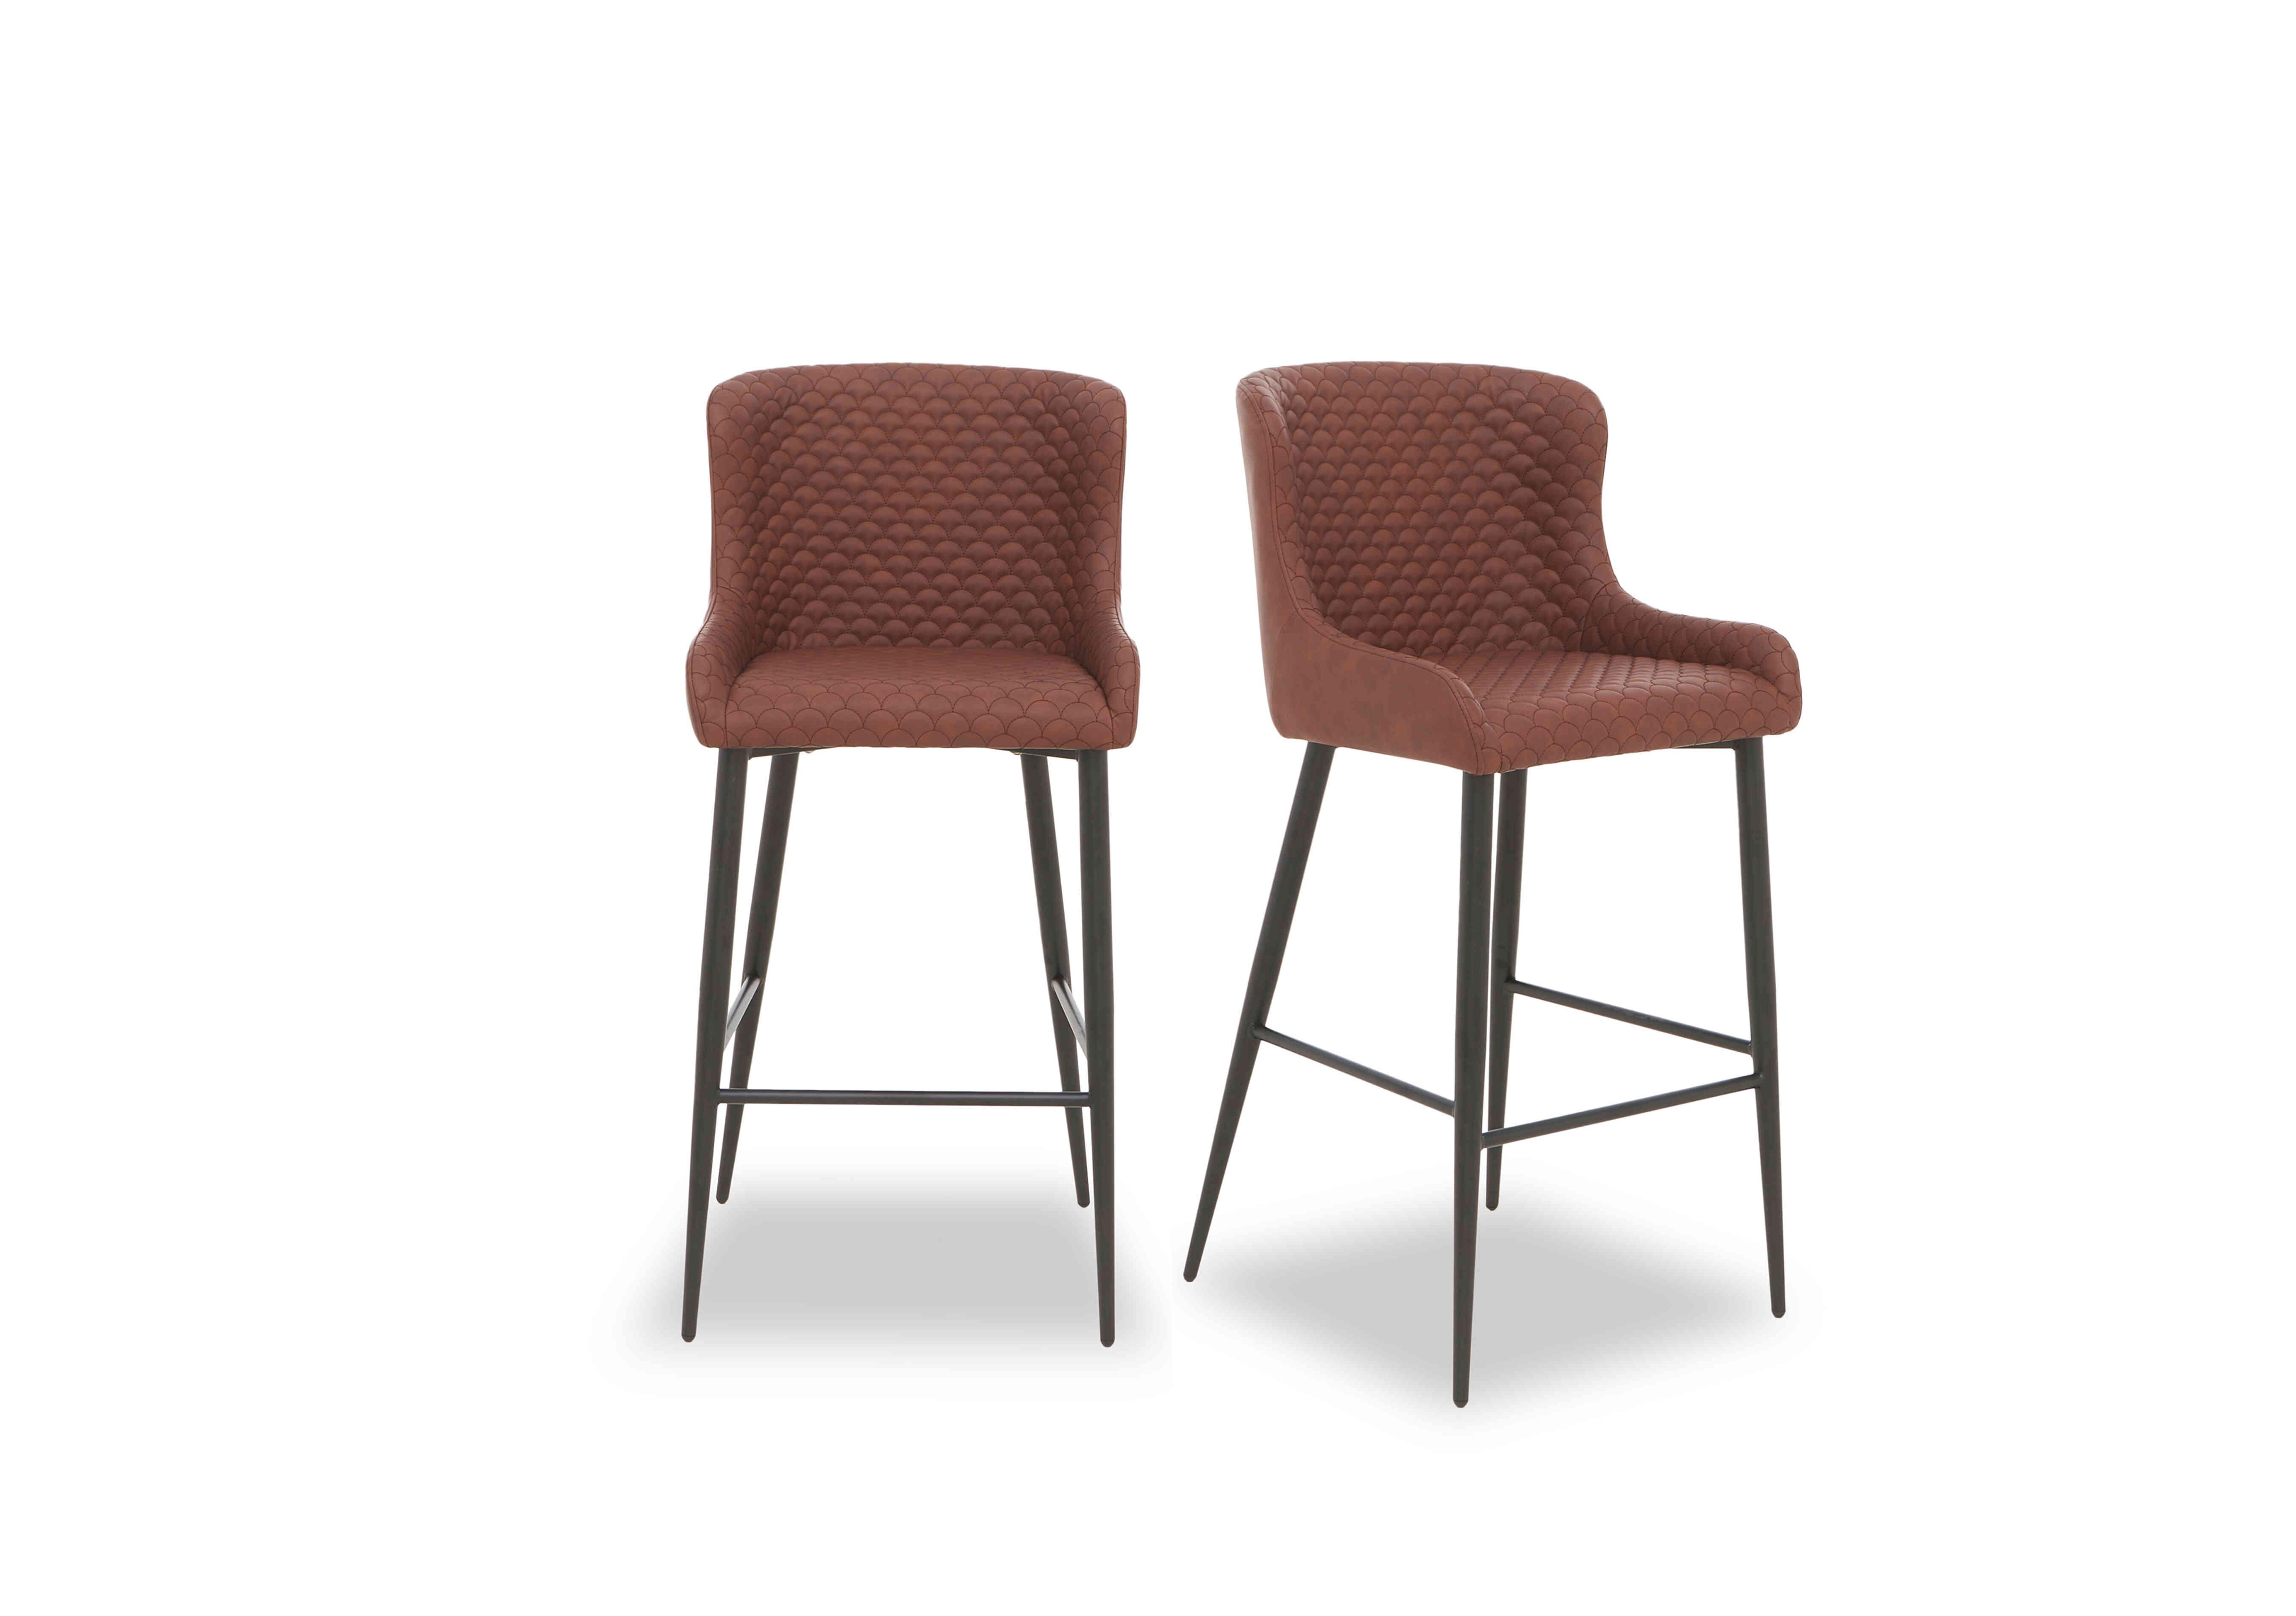 Hanoi Pair of Faux Leather Bar Stools in Tan on Furniture Village